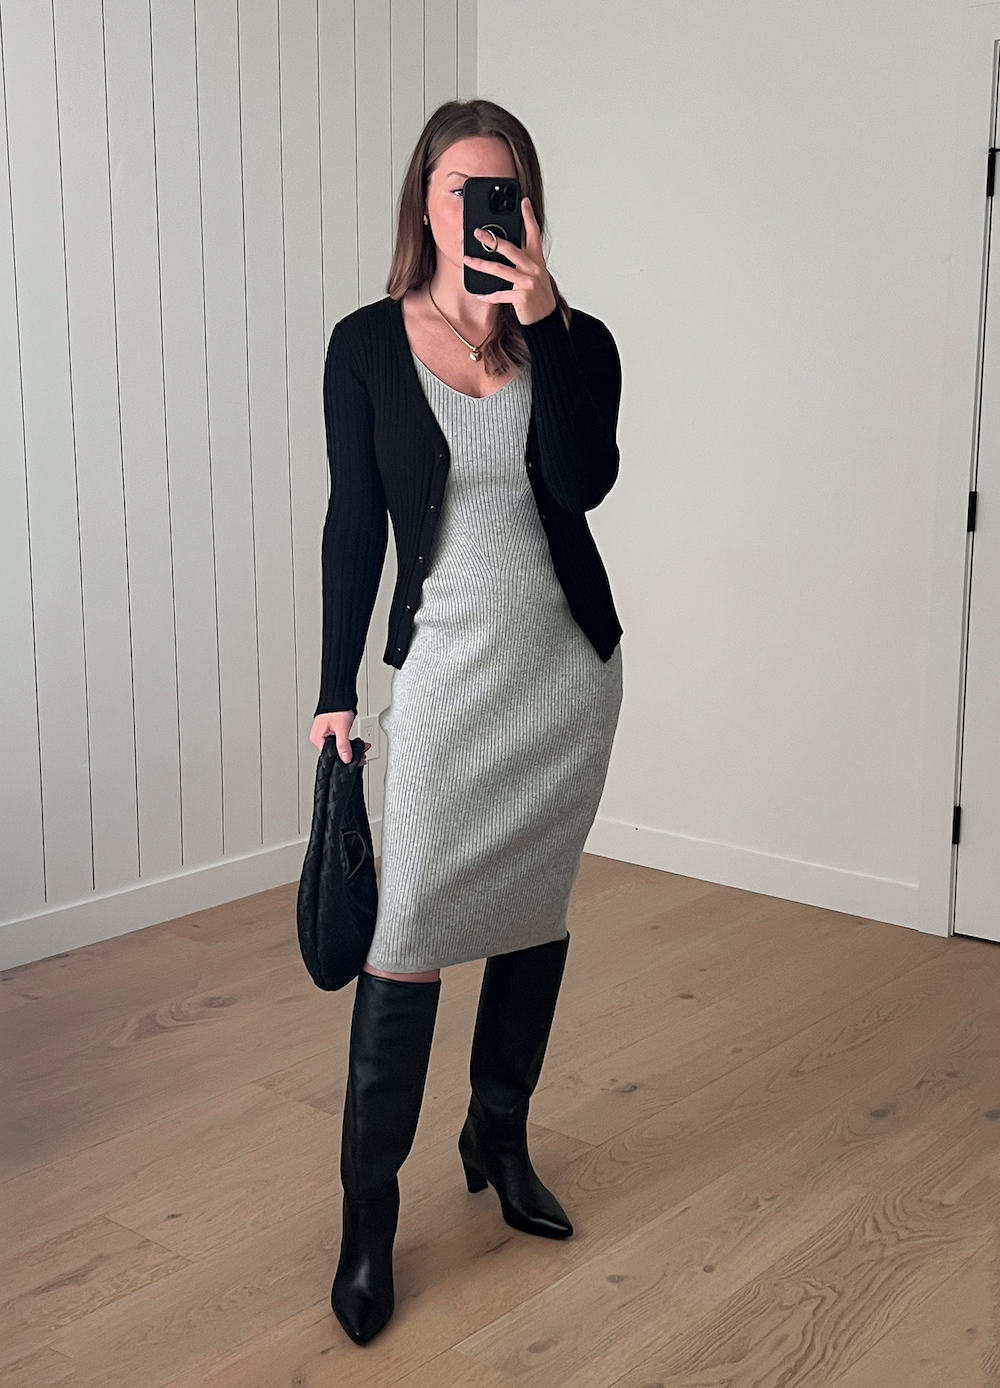 Christal wearing a grey sweater dress with tall black boots and a black cardigan.